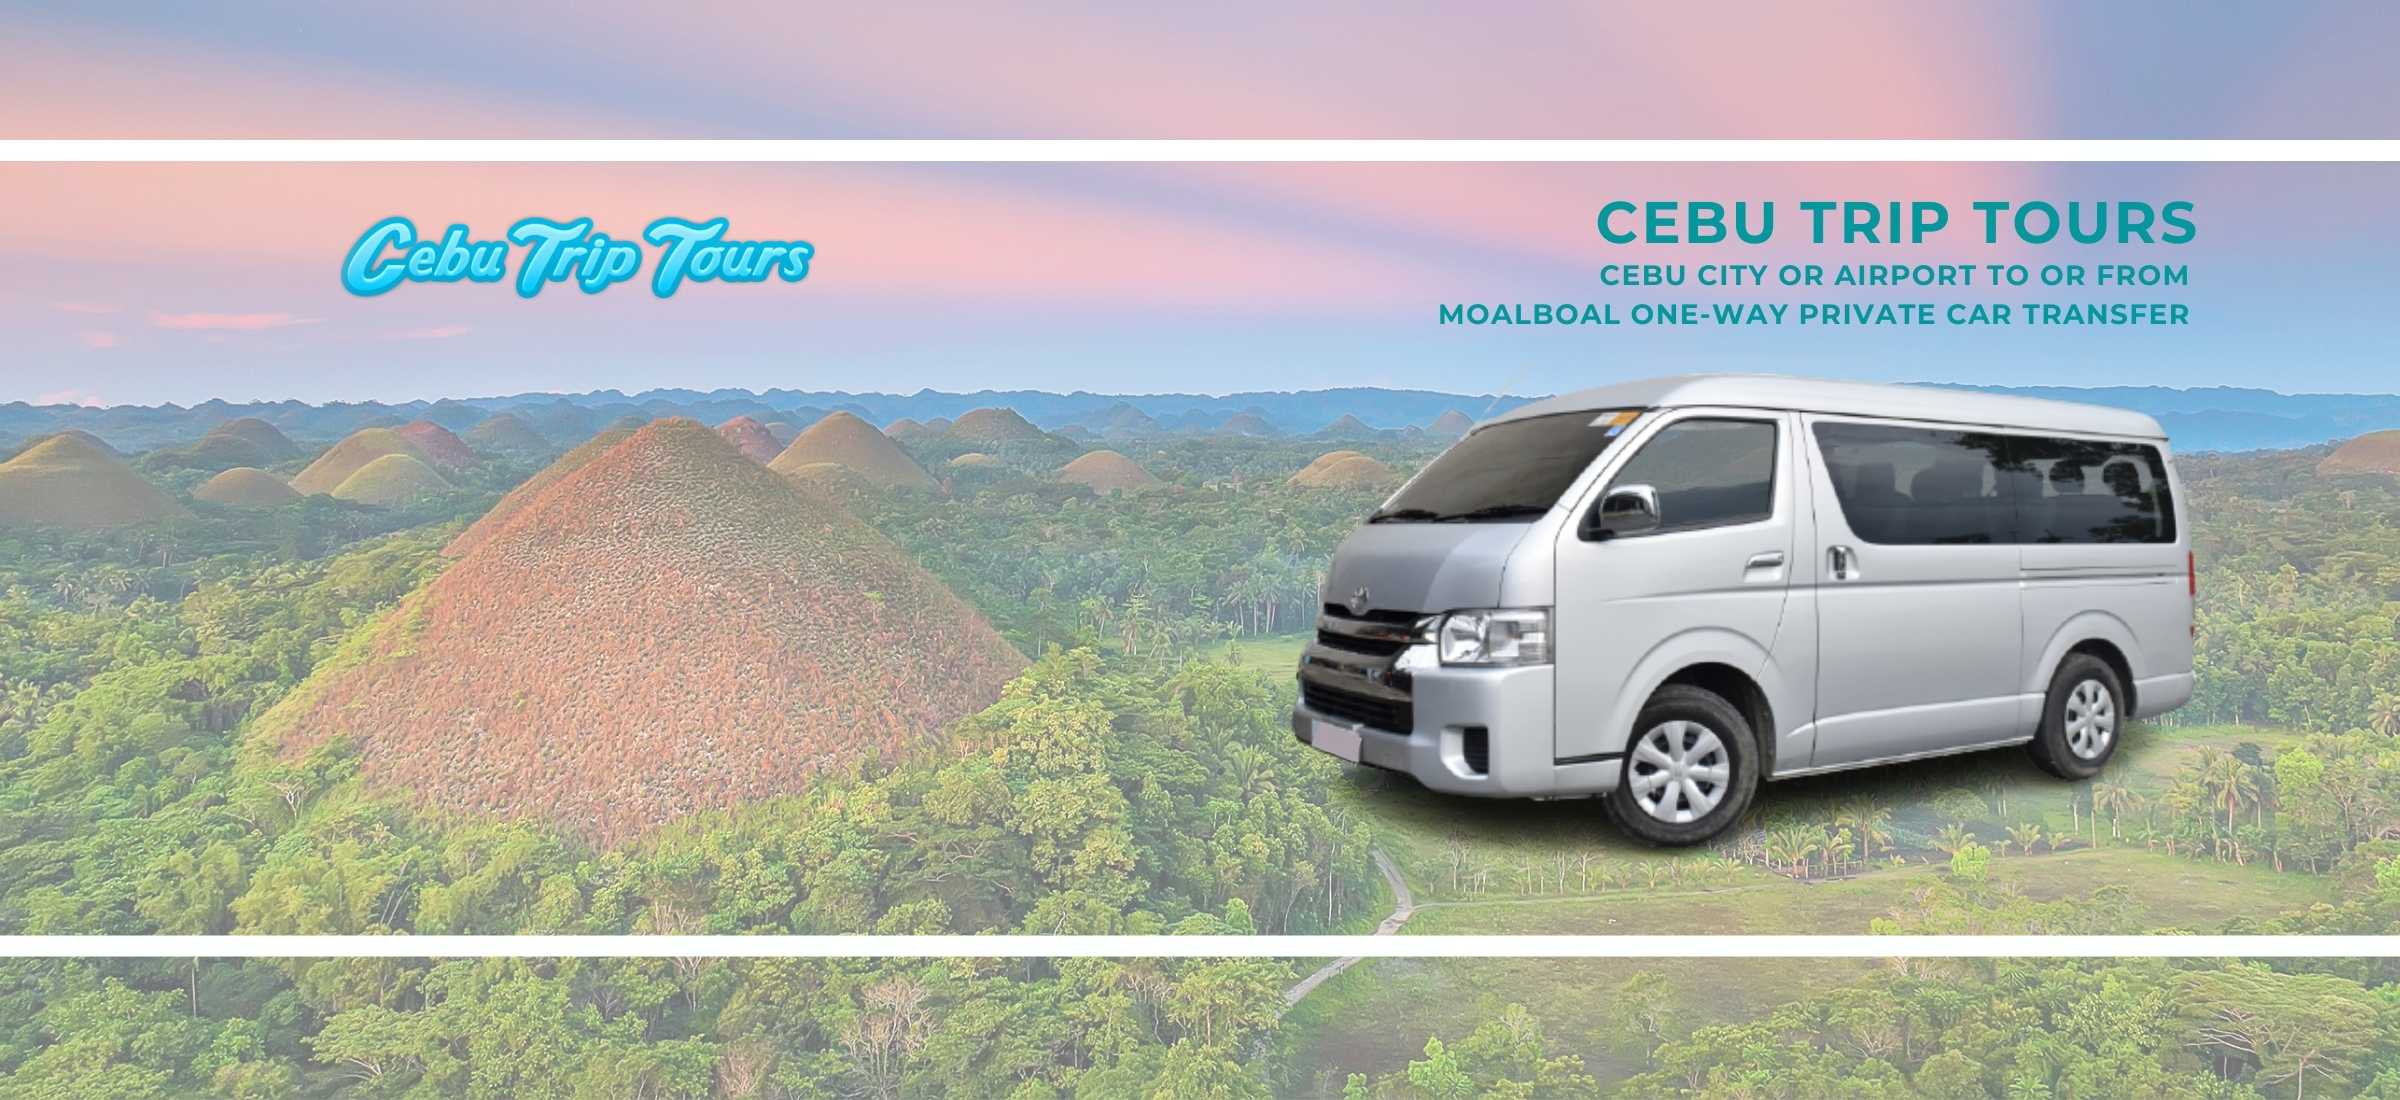 Cebu City or Airport to or from Moalboal One-Way Private Car Transfer